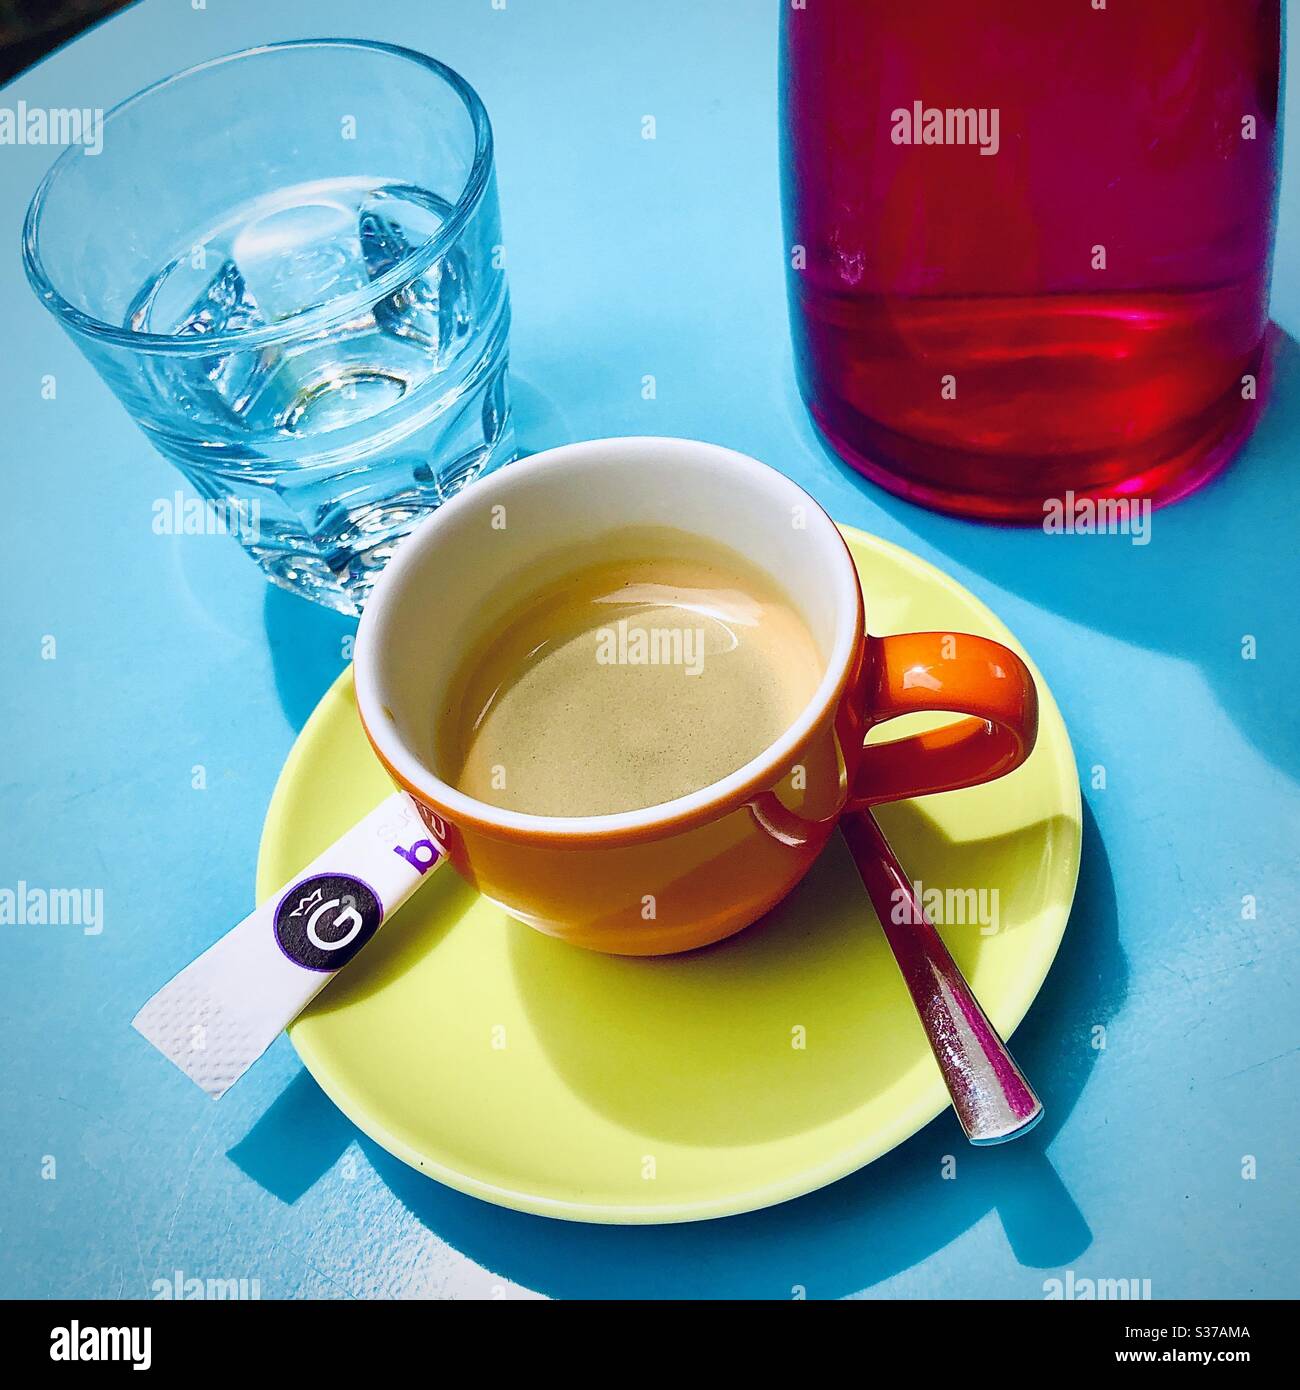 Colourful cafe table and coffee cup. Stock Photo